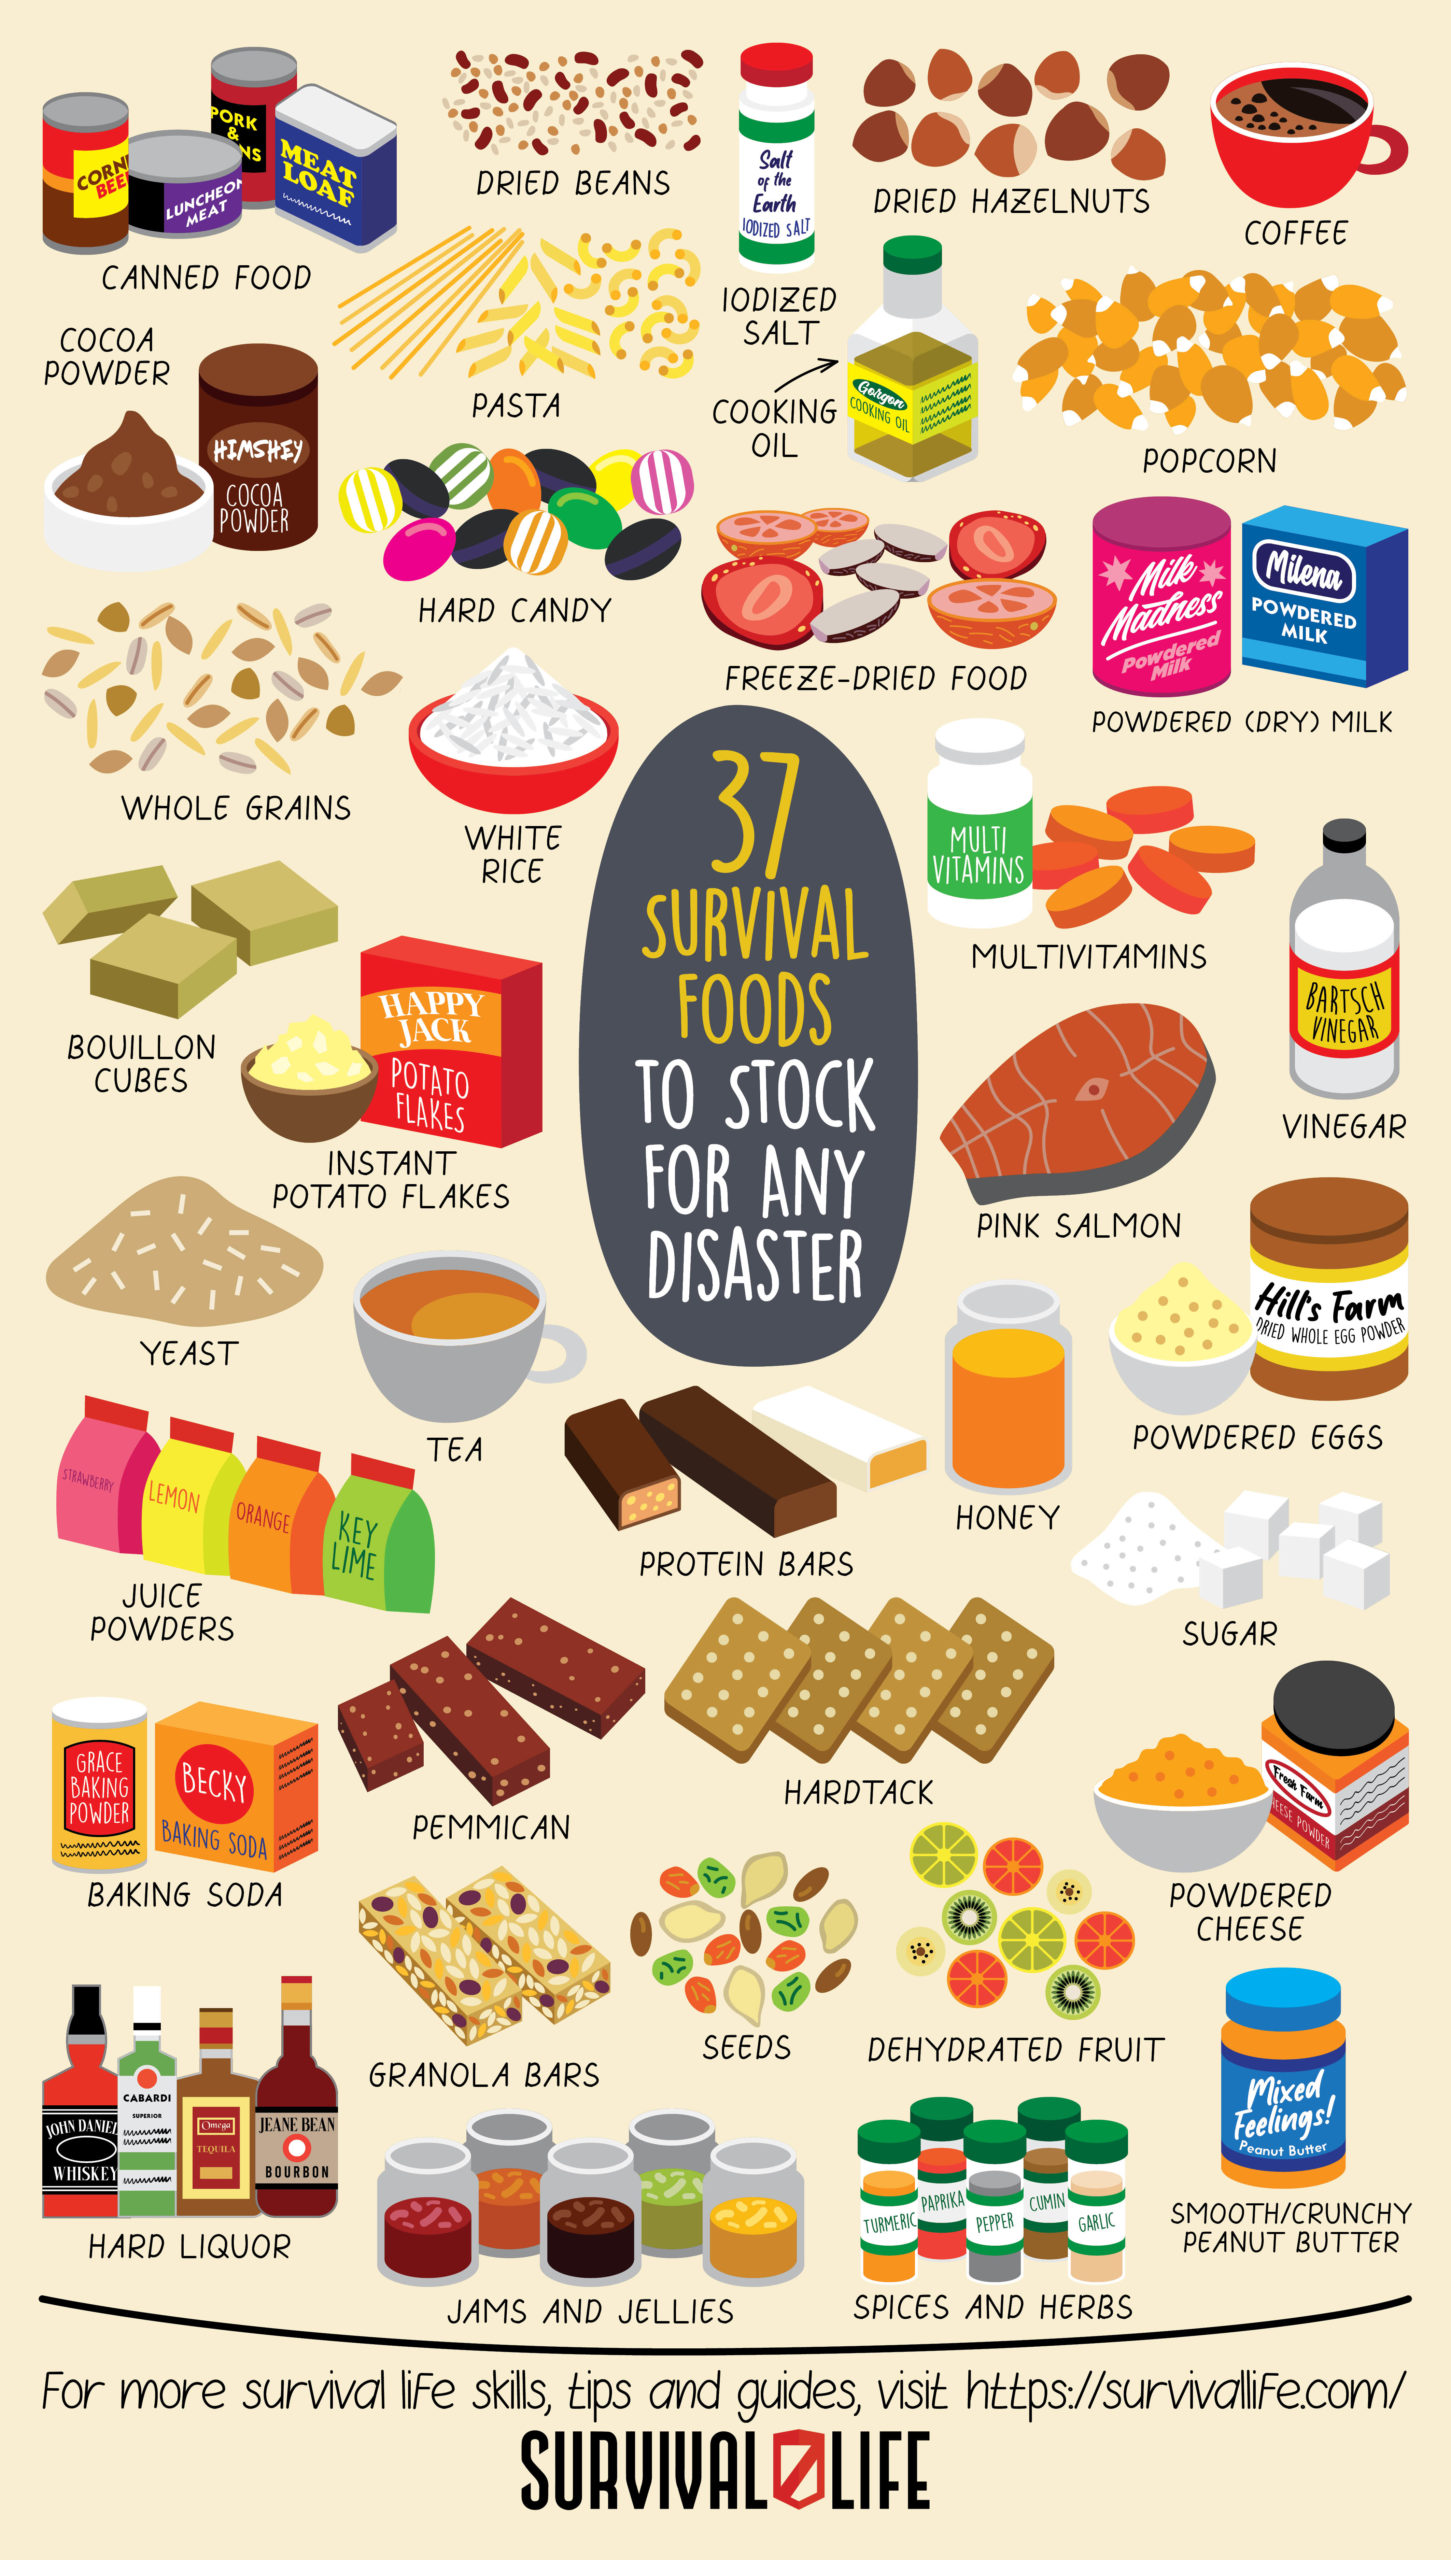 37 Survival Foods to Stock For Any Disaster ver 2